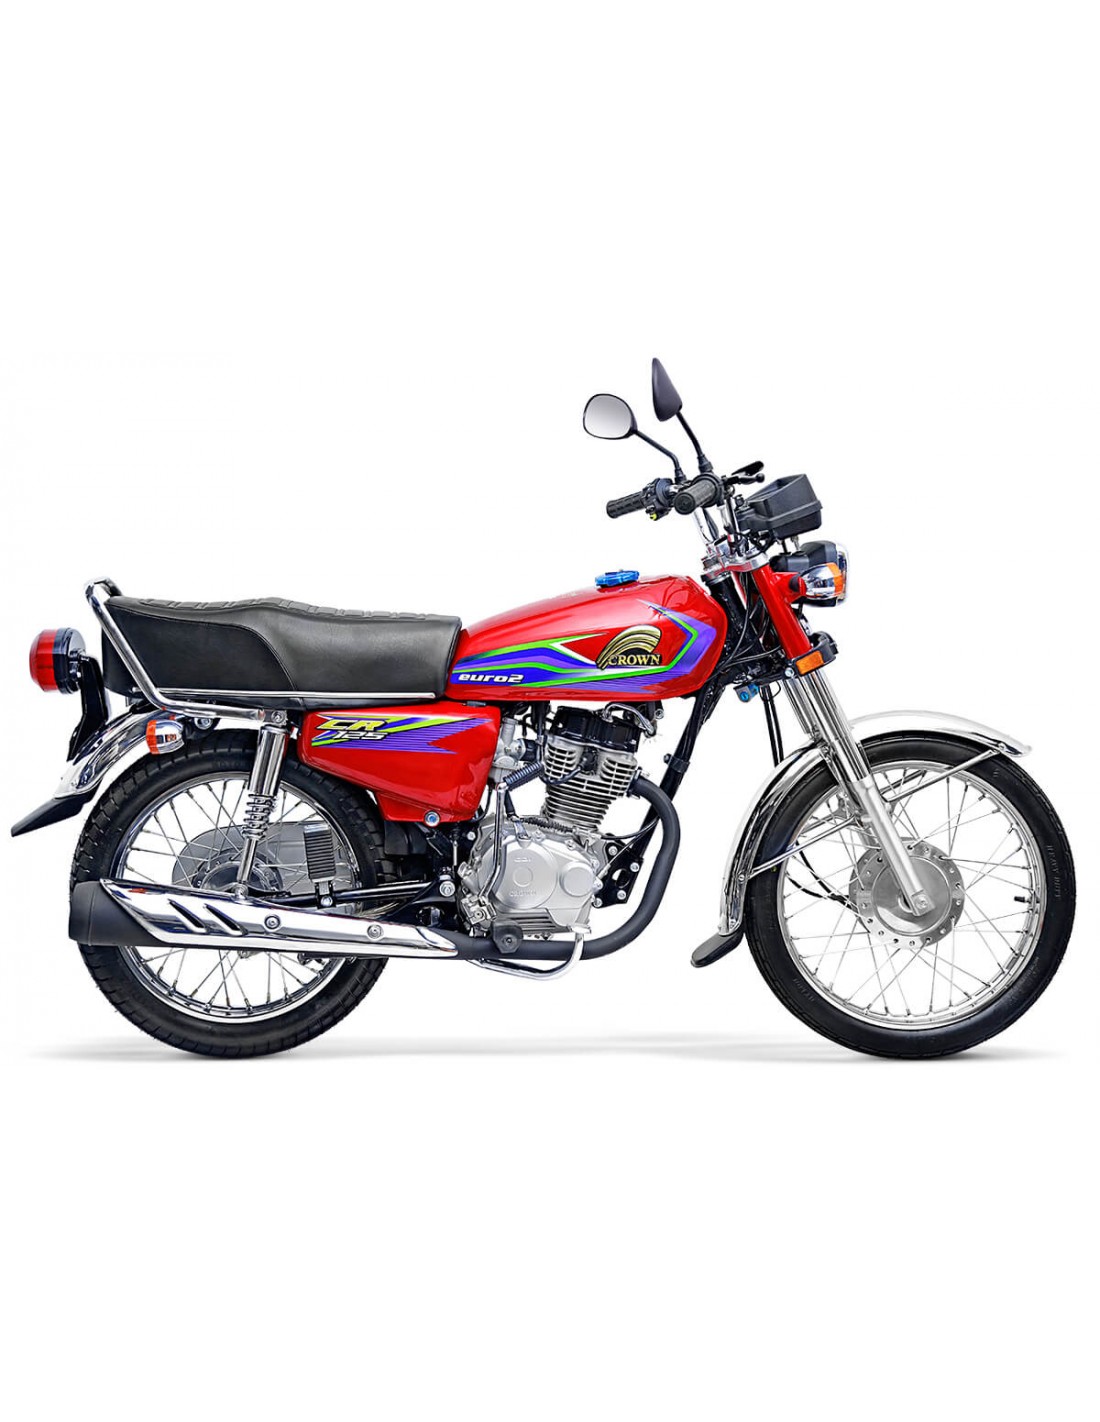 Crown CR 125 Euro II 2020 Model Price Specs Features Mileage Review Pictures